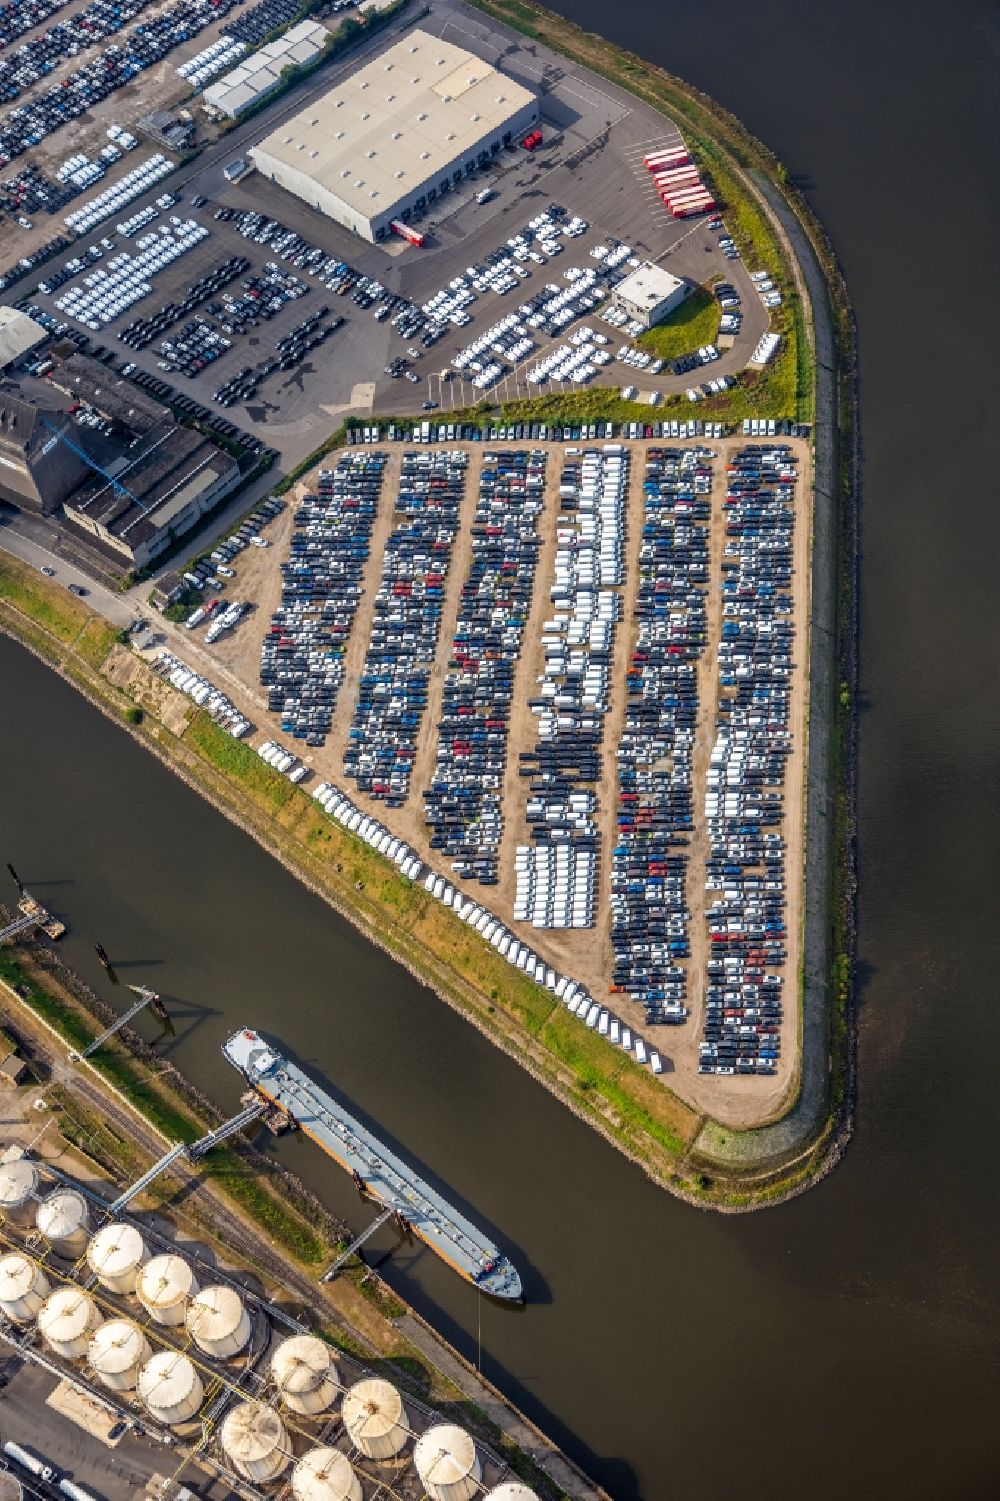 Aerial image Neuss - Automobiles - cars on the parking spaces in the outdoor area of inland port in Neuss in the state North Rhine-Westphalia, Germany